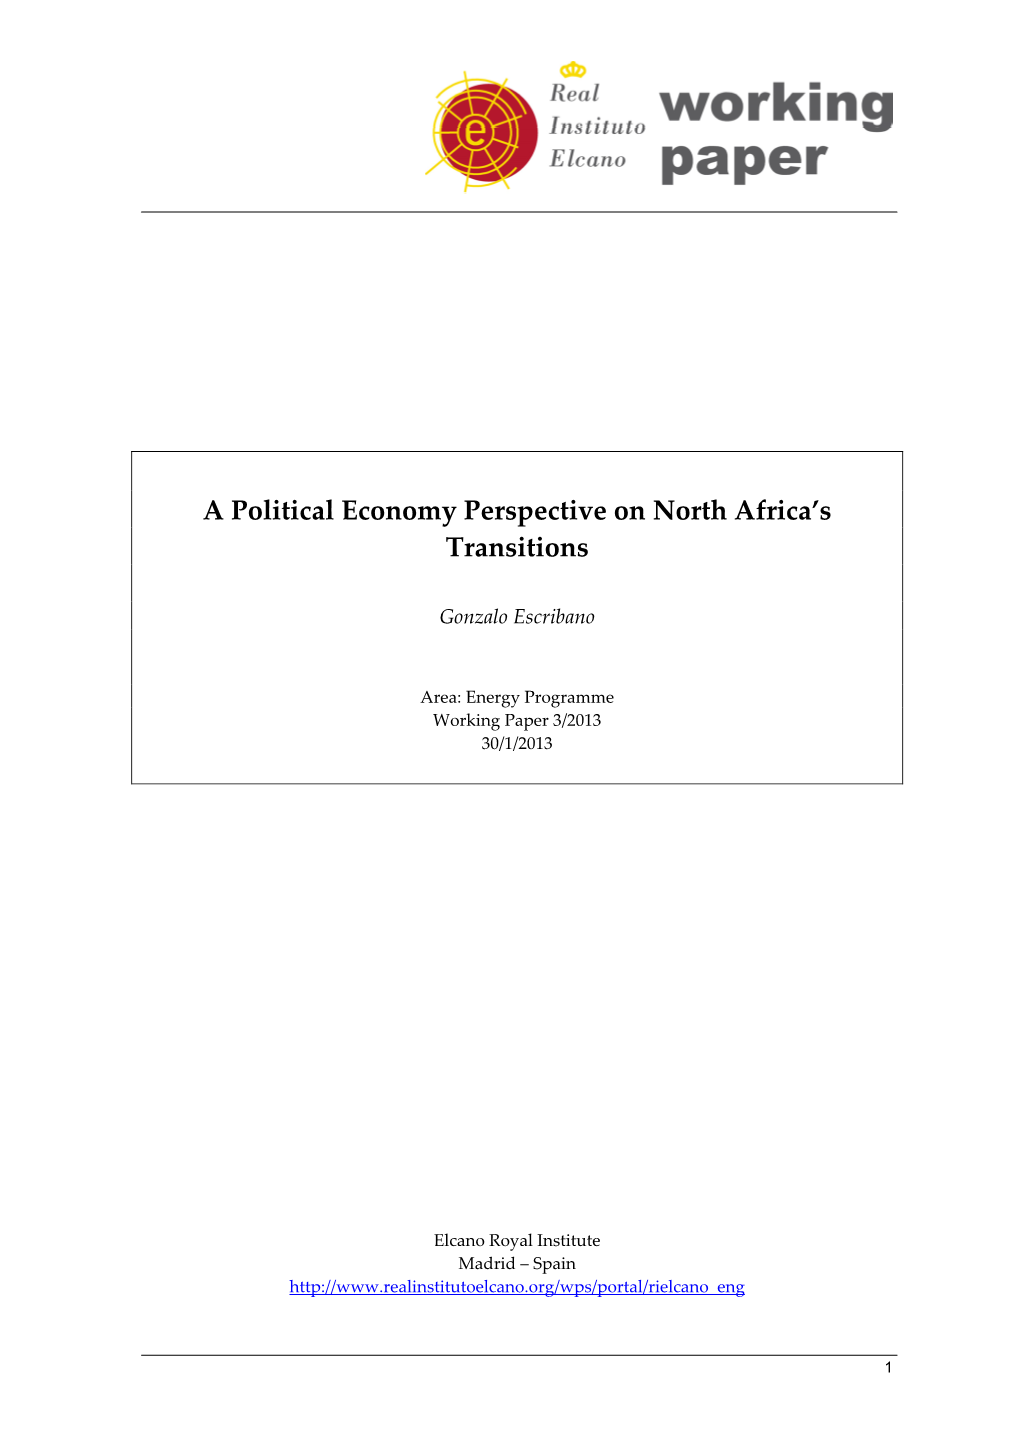 A Political Economy Perspective on North Africa's Transitions